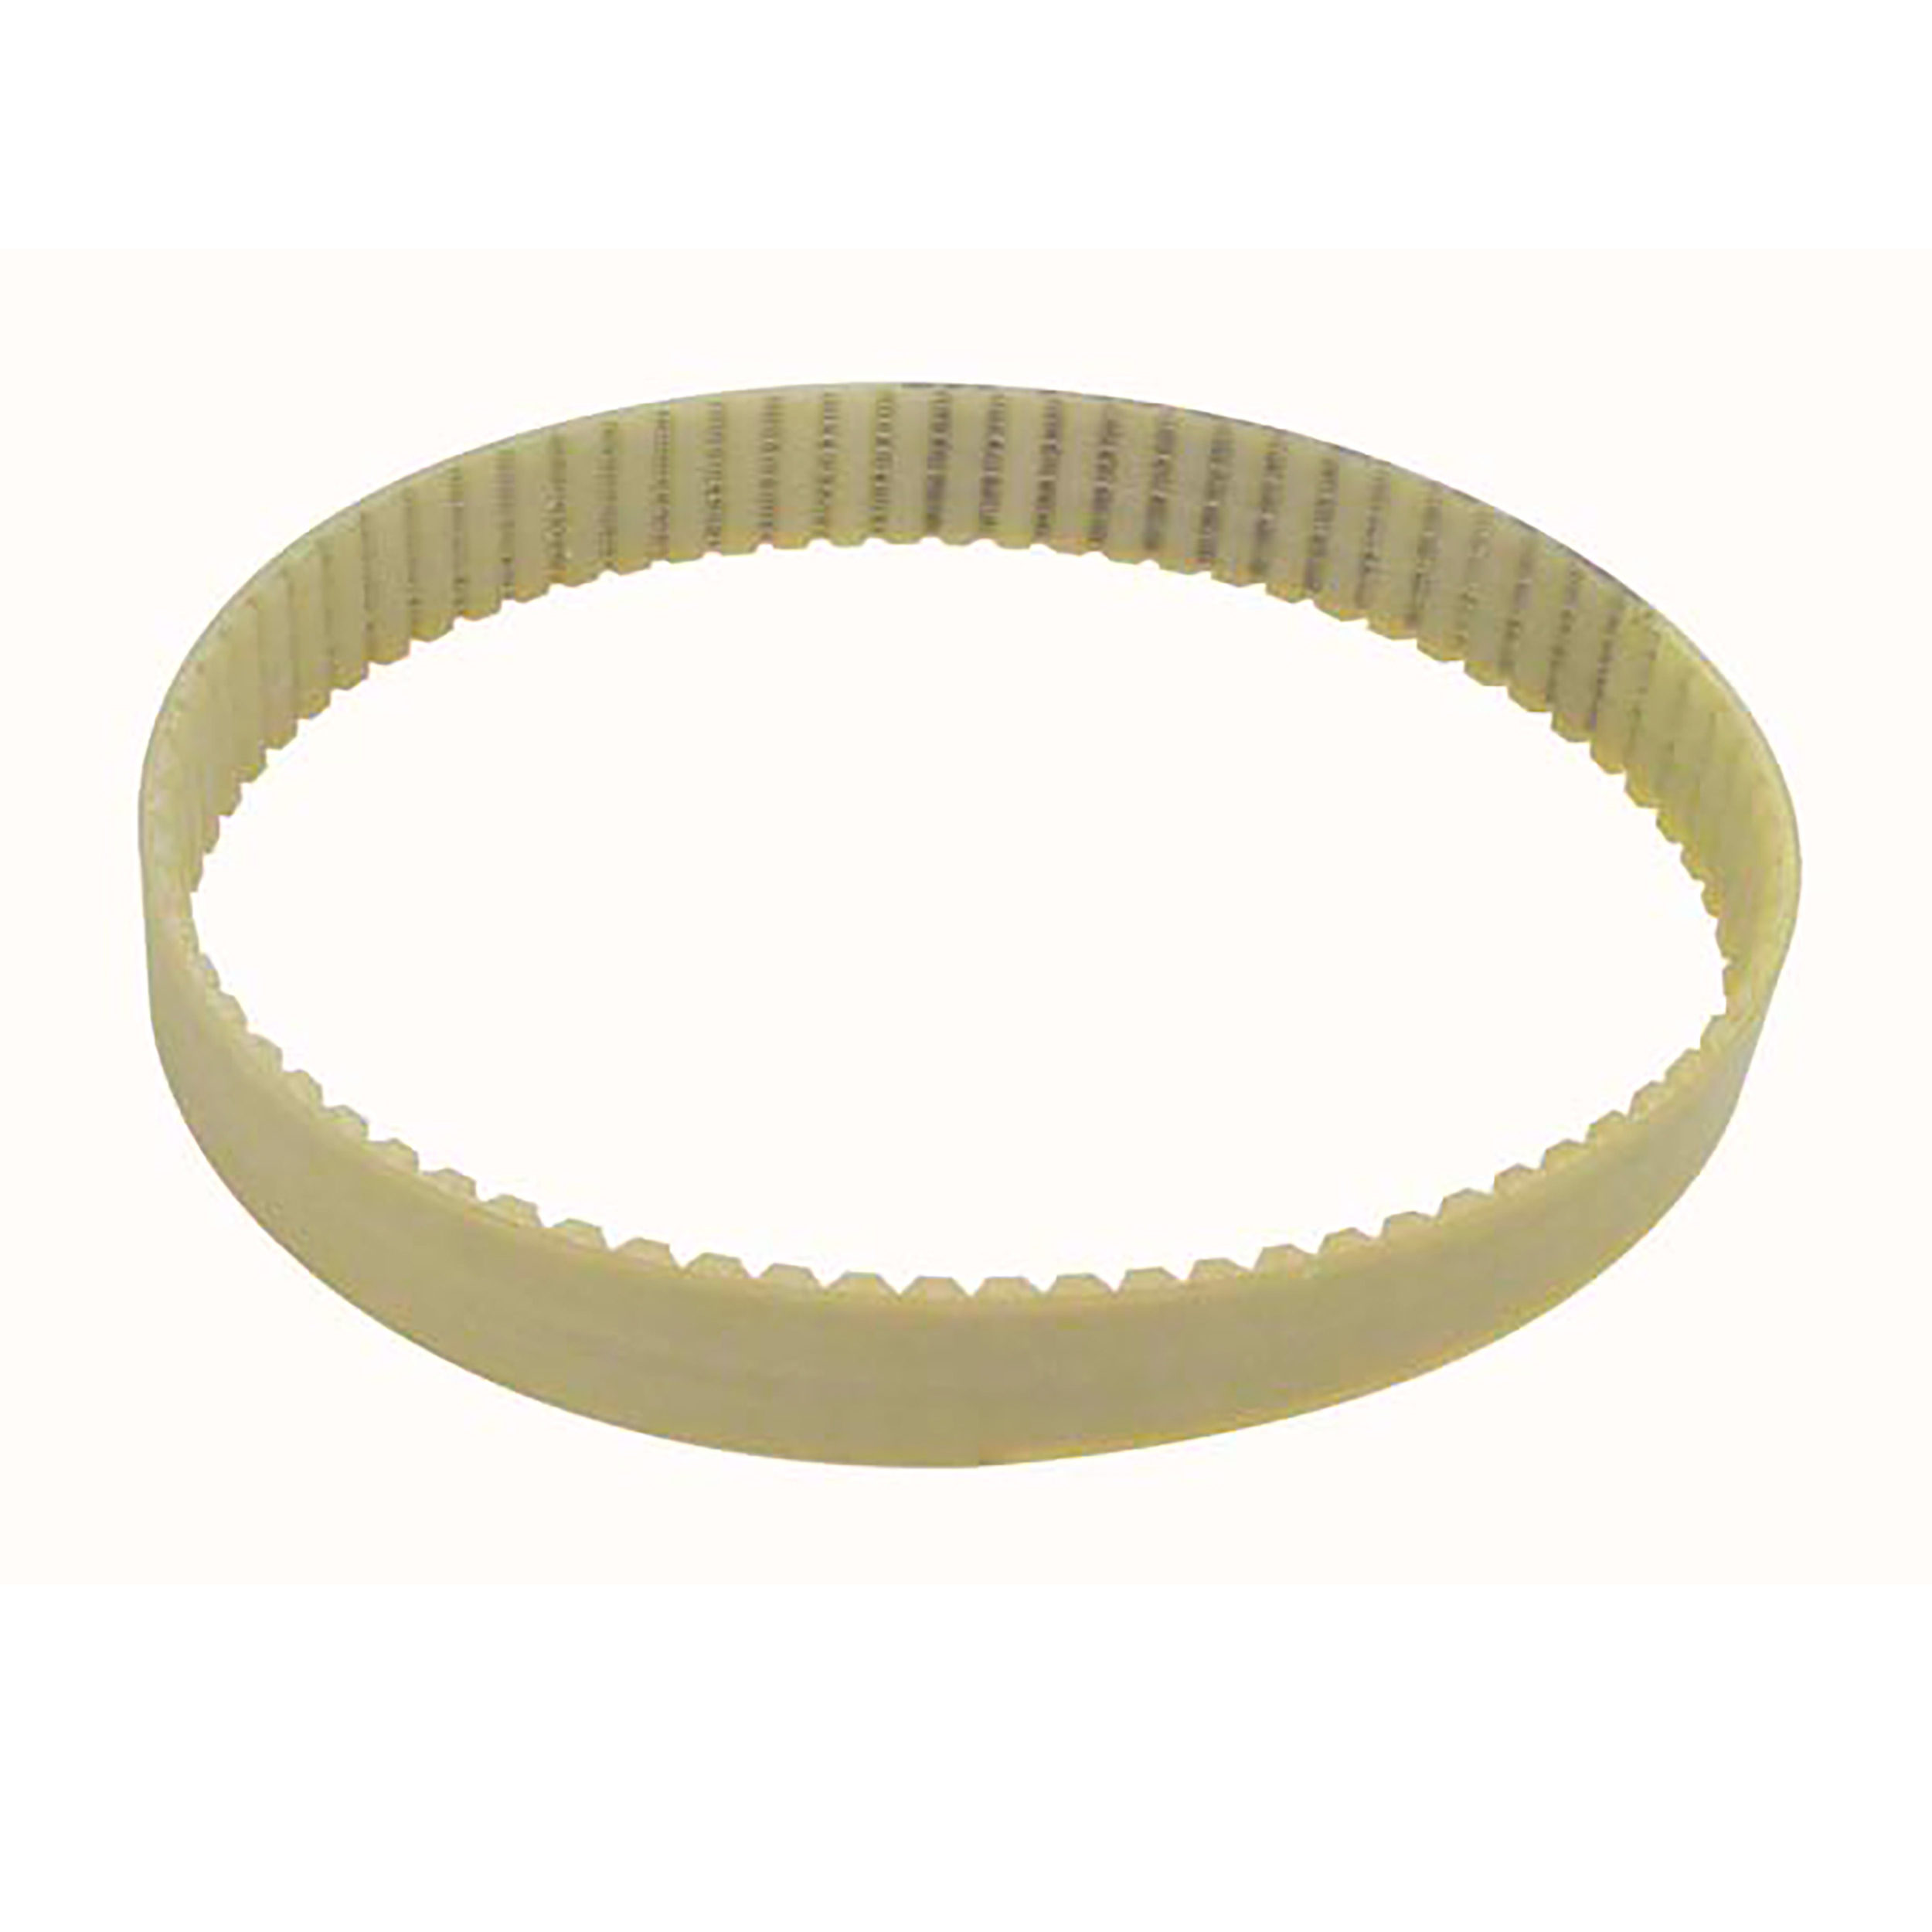 AT type timing belt - AT10 Steel cored polyurethane - 25mm - AT